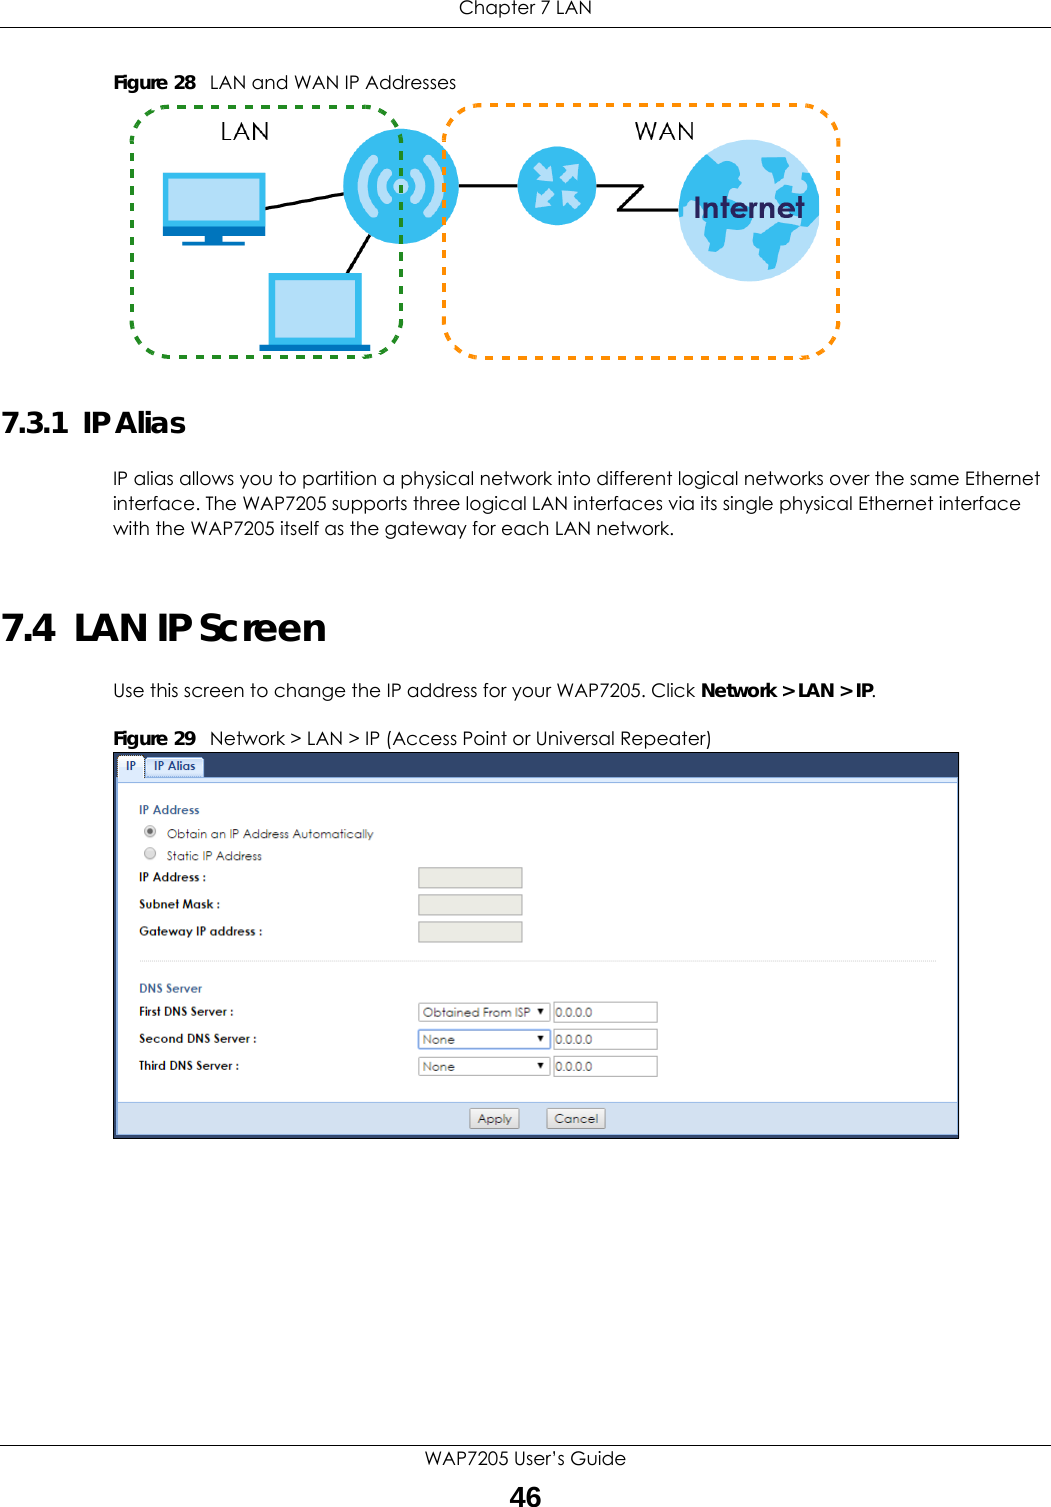 Chapter 7 LANWAP7205 User’s Guide46Figure 28   LAN and WAN IP Addresses7.3.1  IP AliasIP alias allows you to partition a physical network into different logical networks over the same Ethernet interface. The WAP7205 supports three logical LAN interfaces via its single physical Ethernet interface with the WAP7205 itself as the gateway for each LAN network.7.4  LAN IP ScreenUse this screen to change the IP address for your WAP7205. Click Network &gt; LAN &gt; IP.Figure 29   Network &gt; LAN &gt; IP (Access Point or Universal Repeater) 